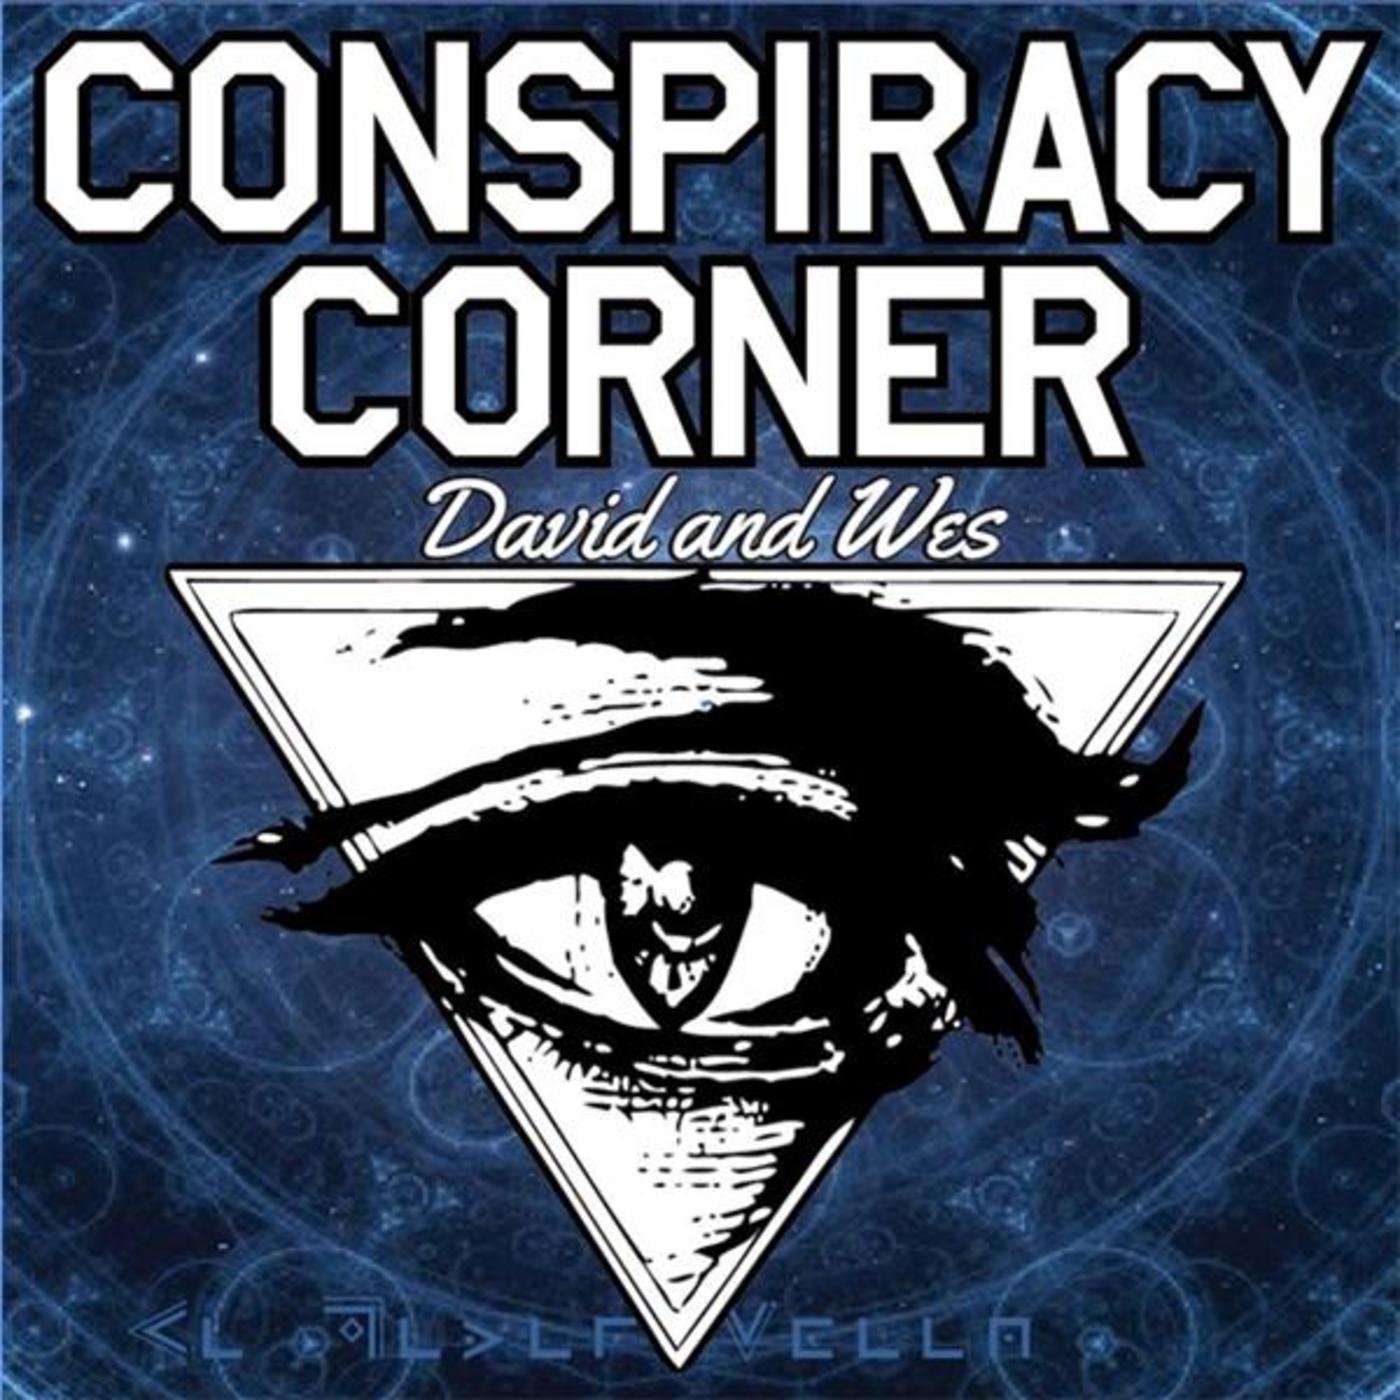 Conspiracy Corner - Dave and Wes